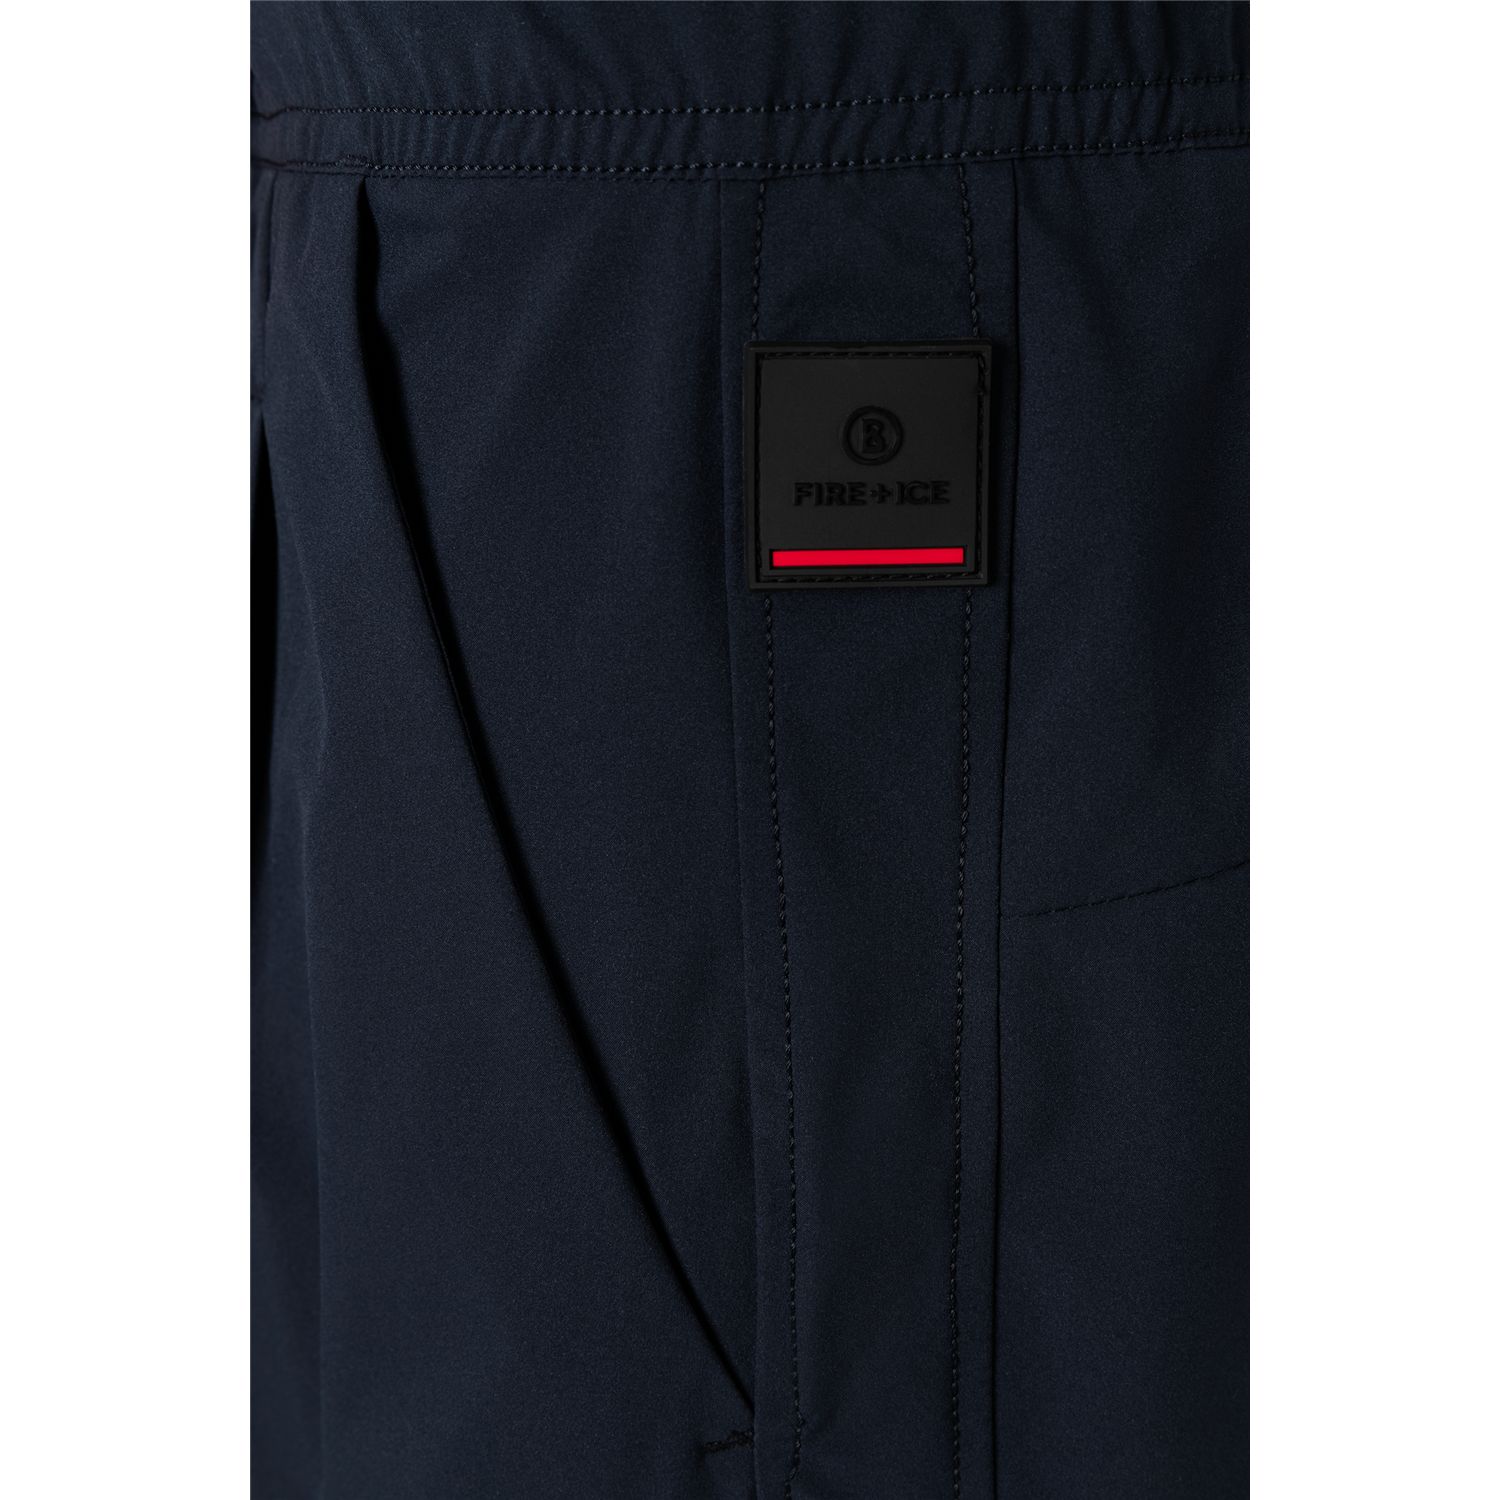 Joggers & Sweatpants -  bogner fire and ice Bevan Functional Trousers